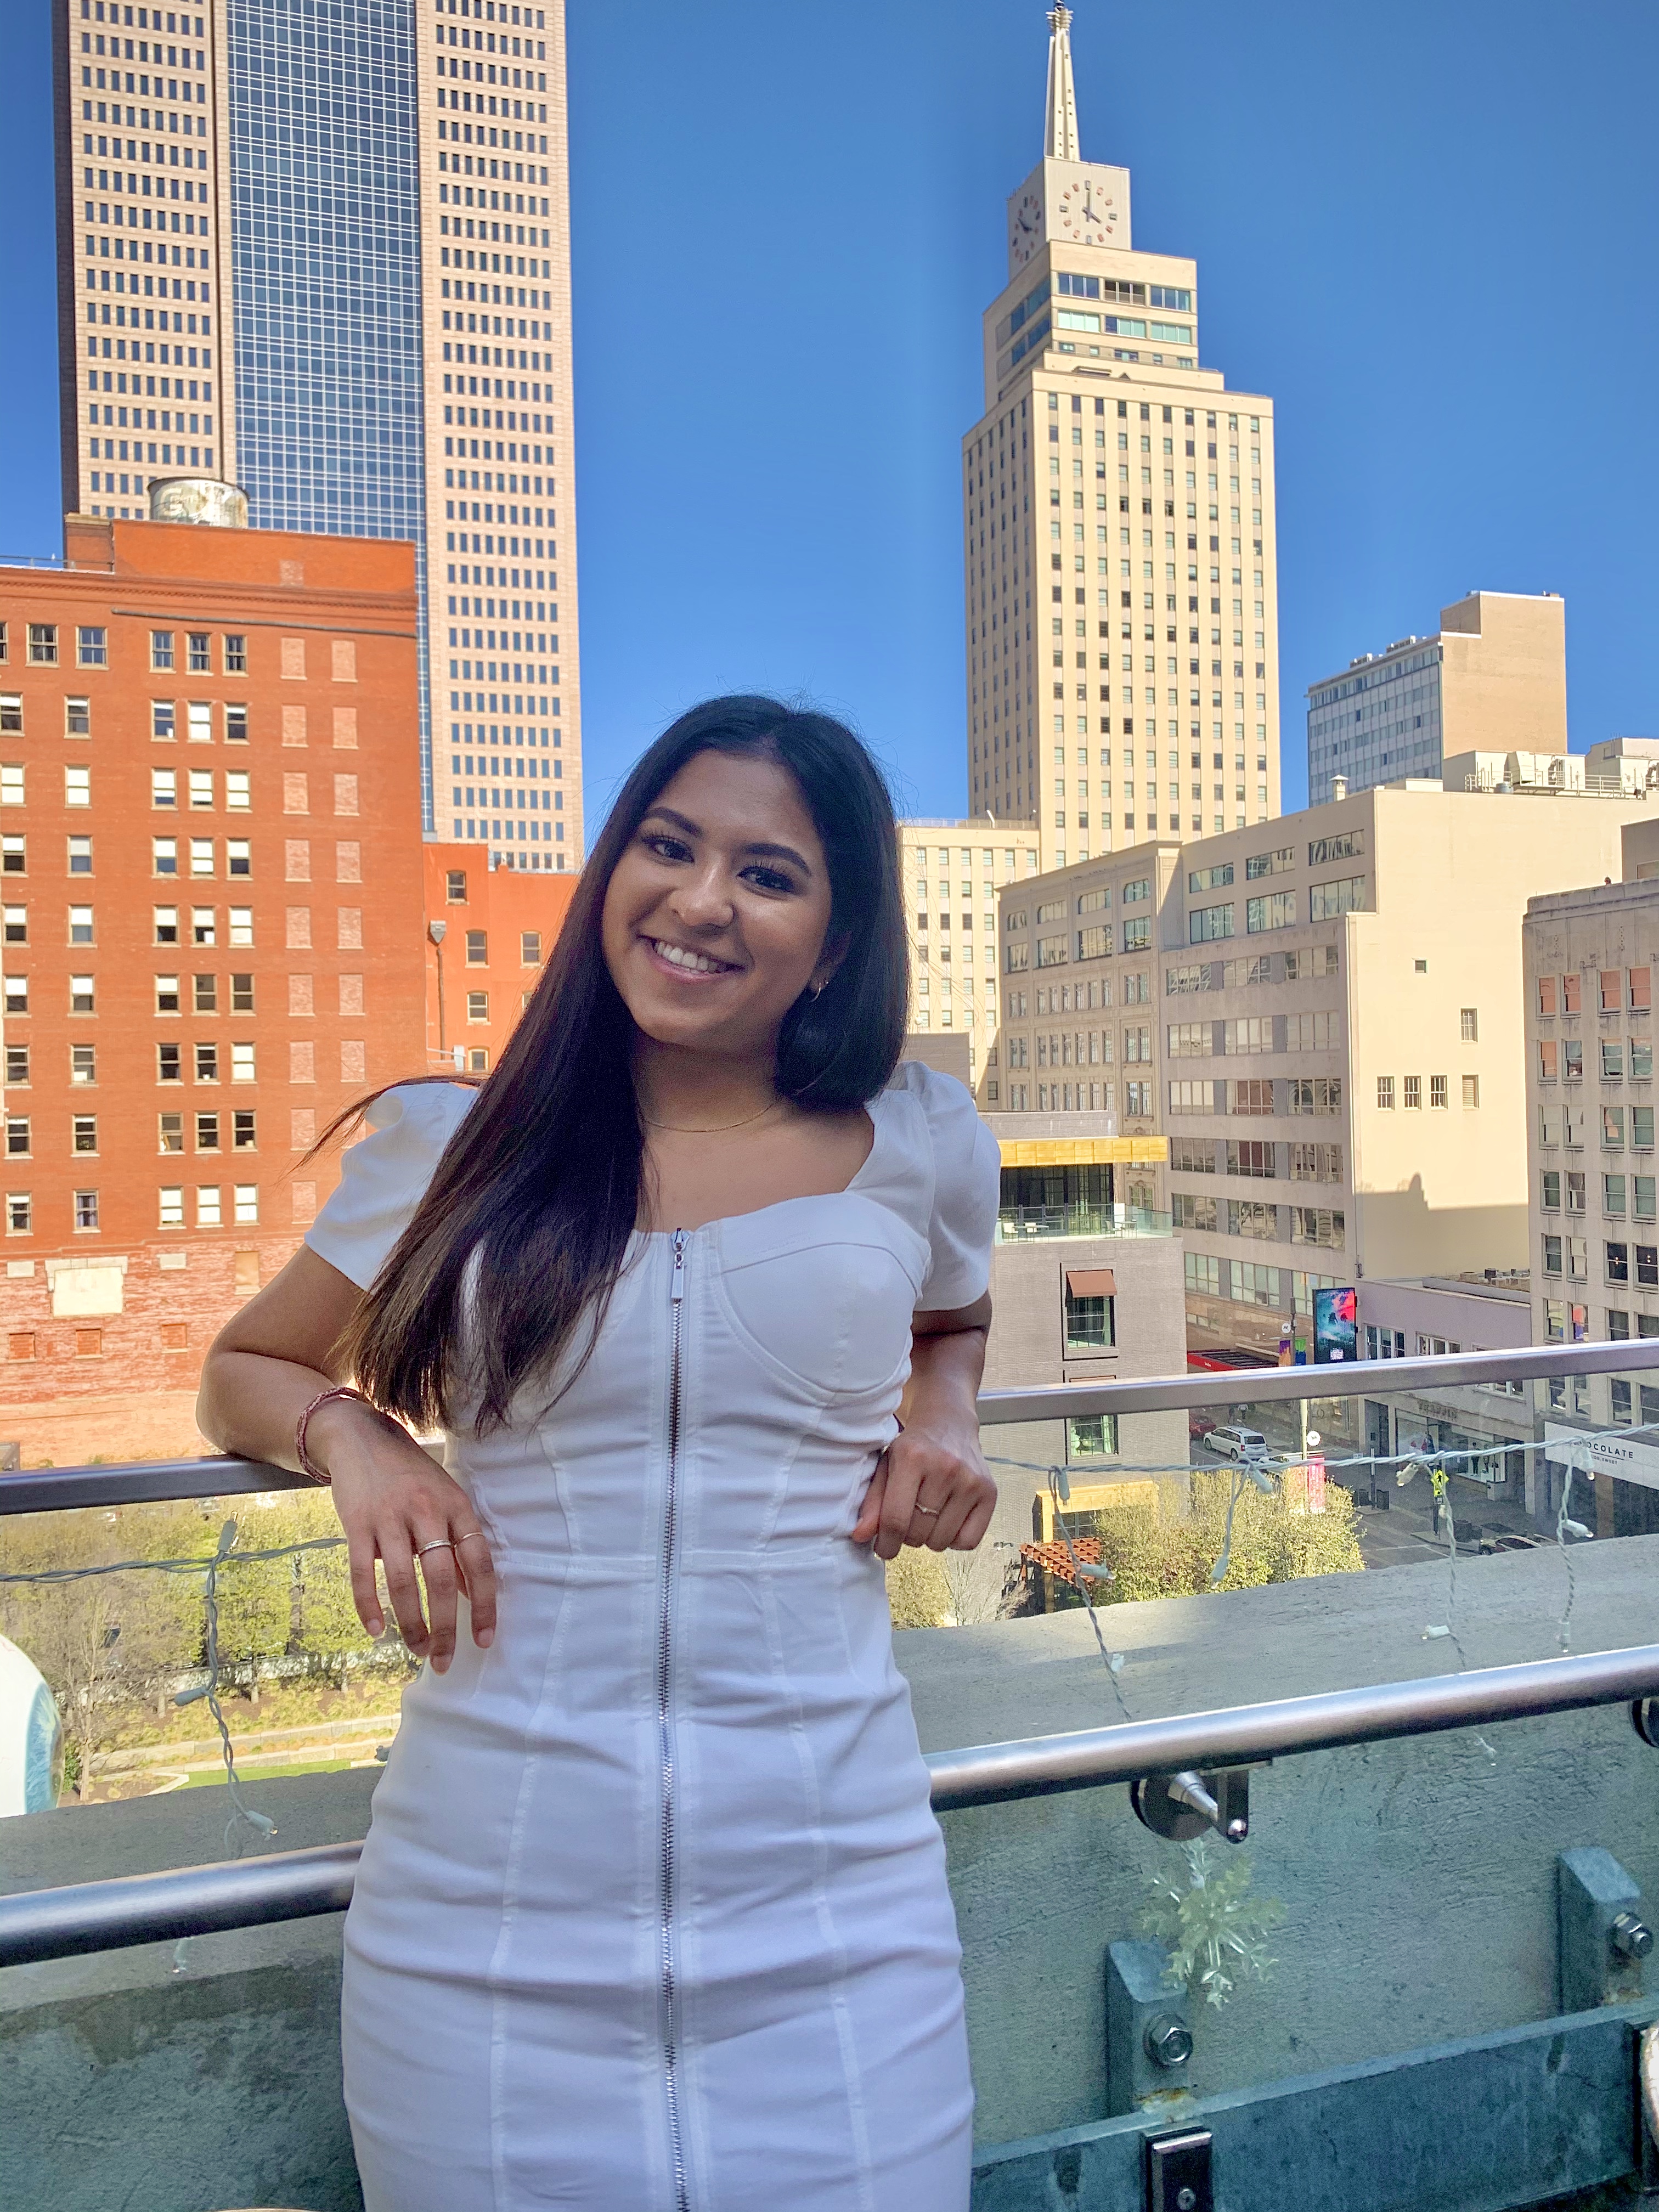 A young woman in a white dress stands on a balcony smiling with a city 's buildings behind her